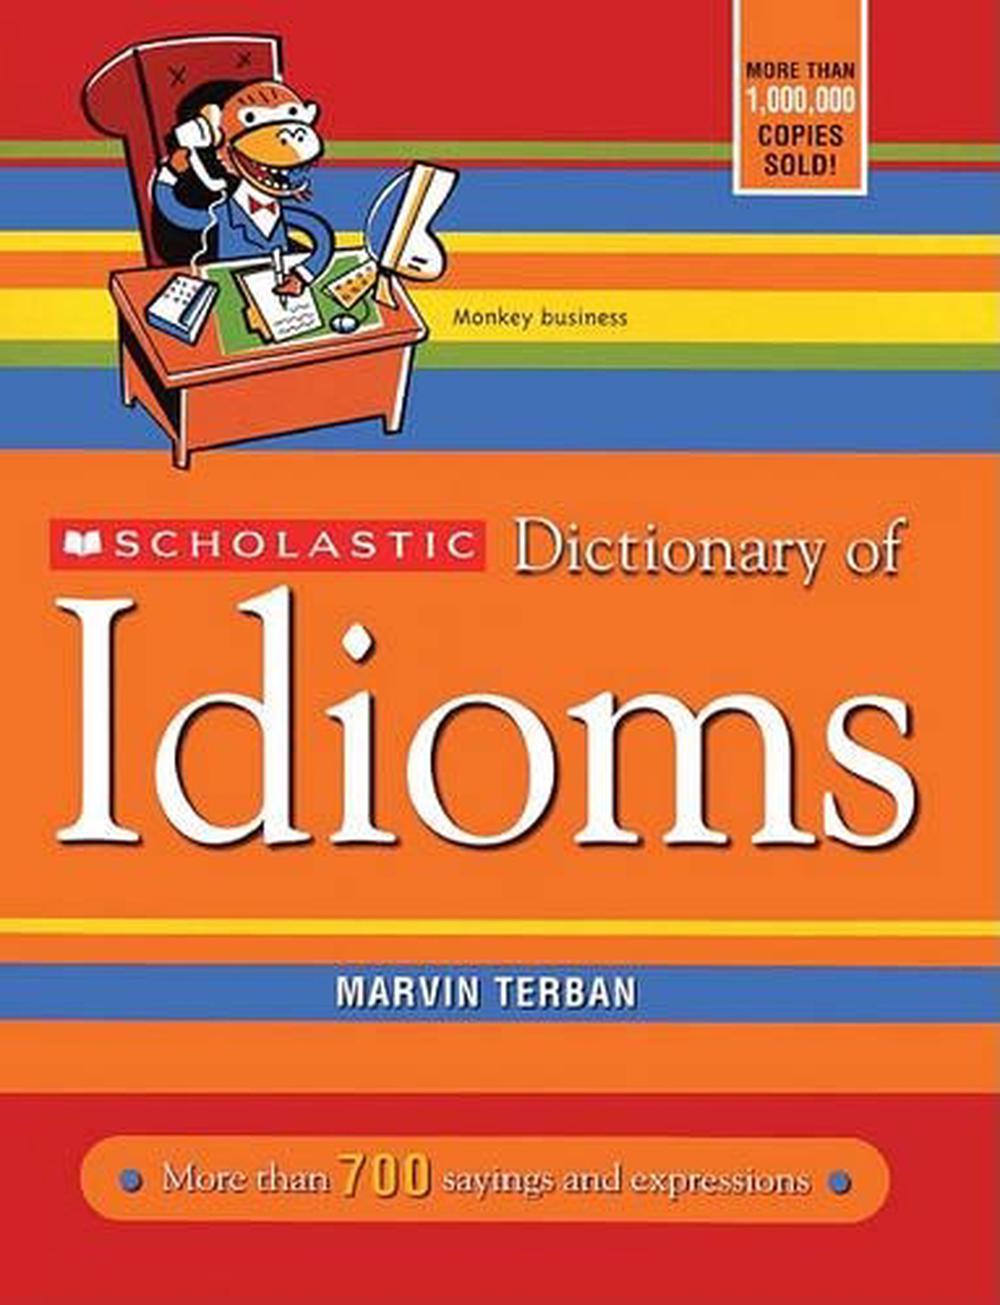 booked it idioms